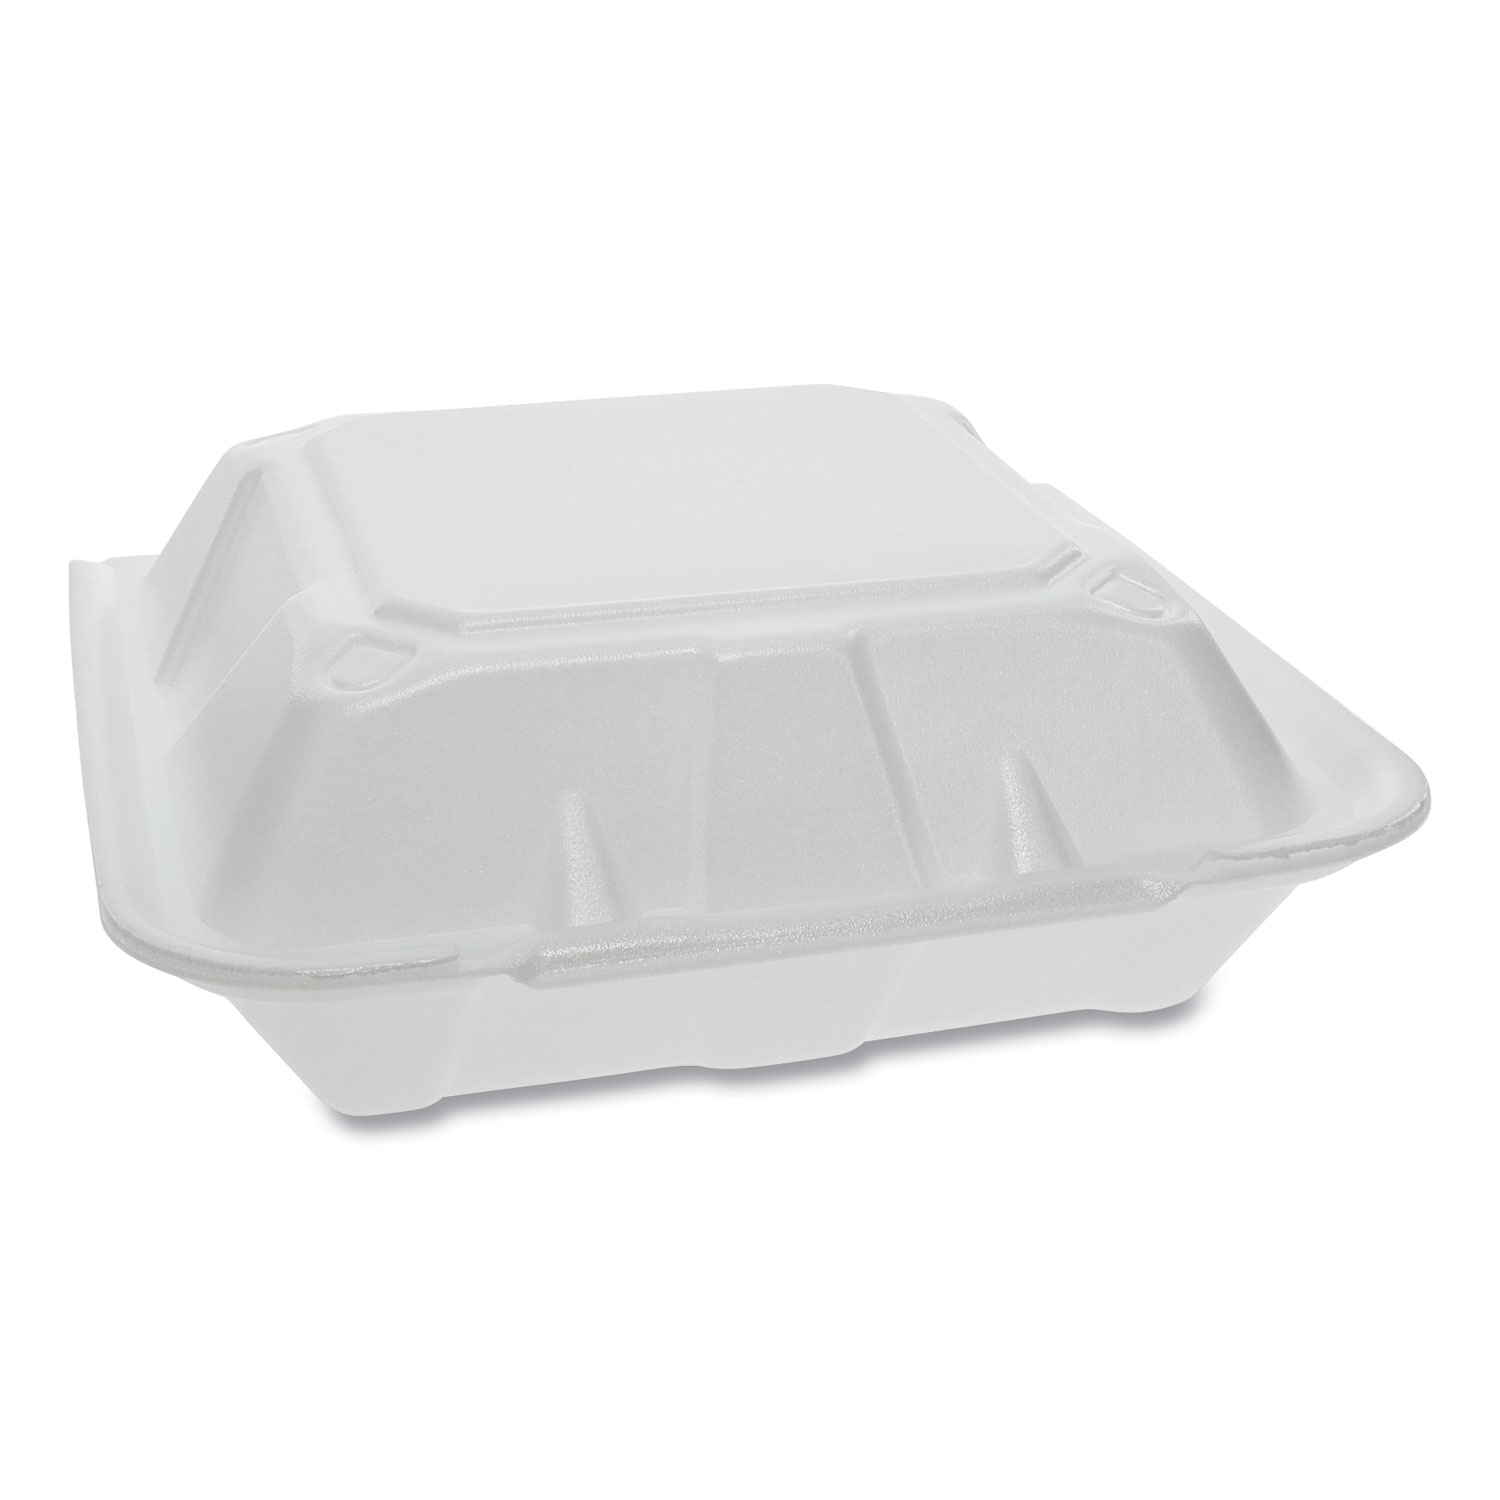 Pactiv Foam Hinged Lid Containers, Dual Tab Lock, 9.13 x 9 x 3.25, 1-Compartment, White, 150/Carton